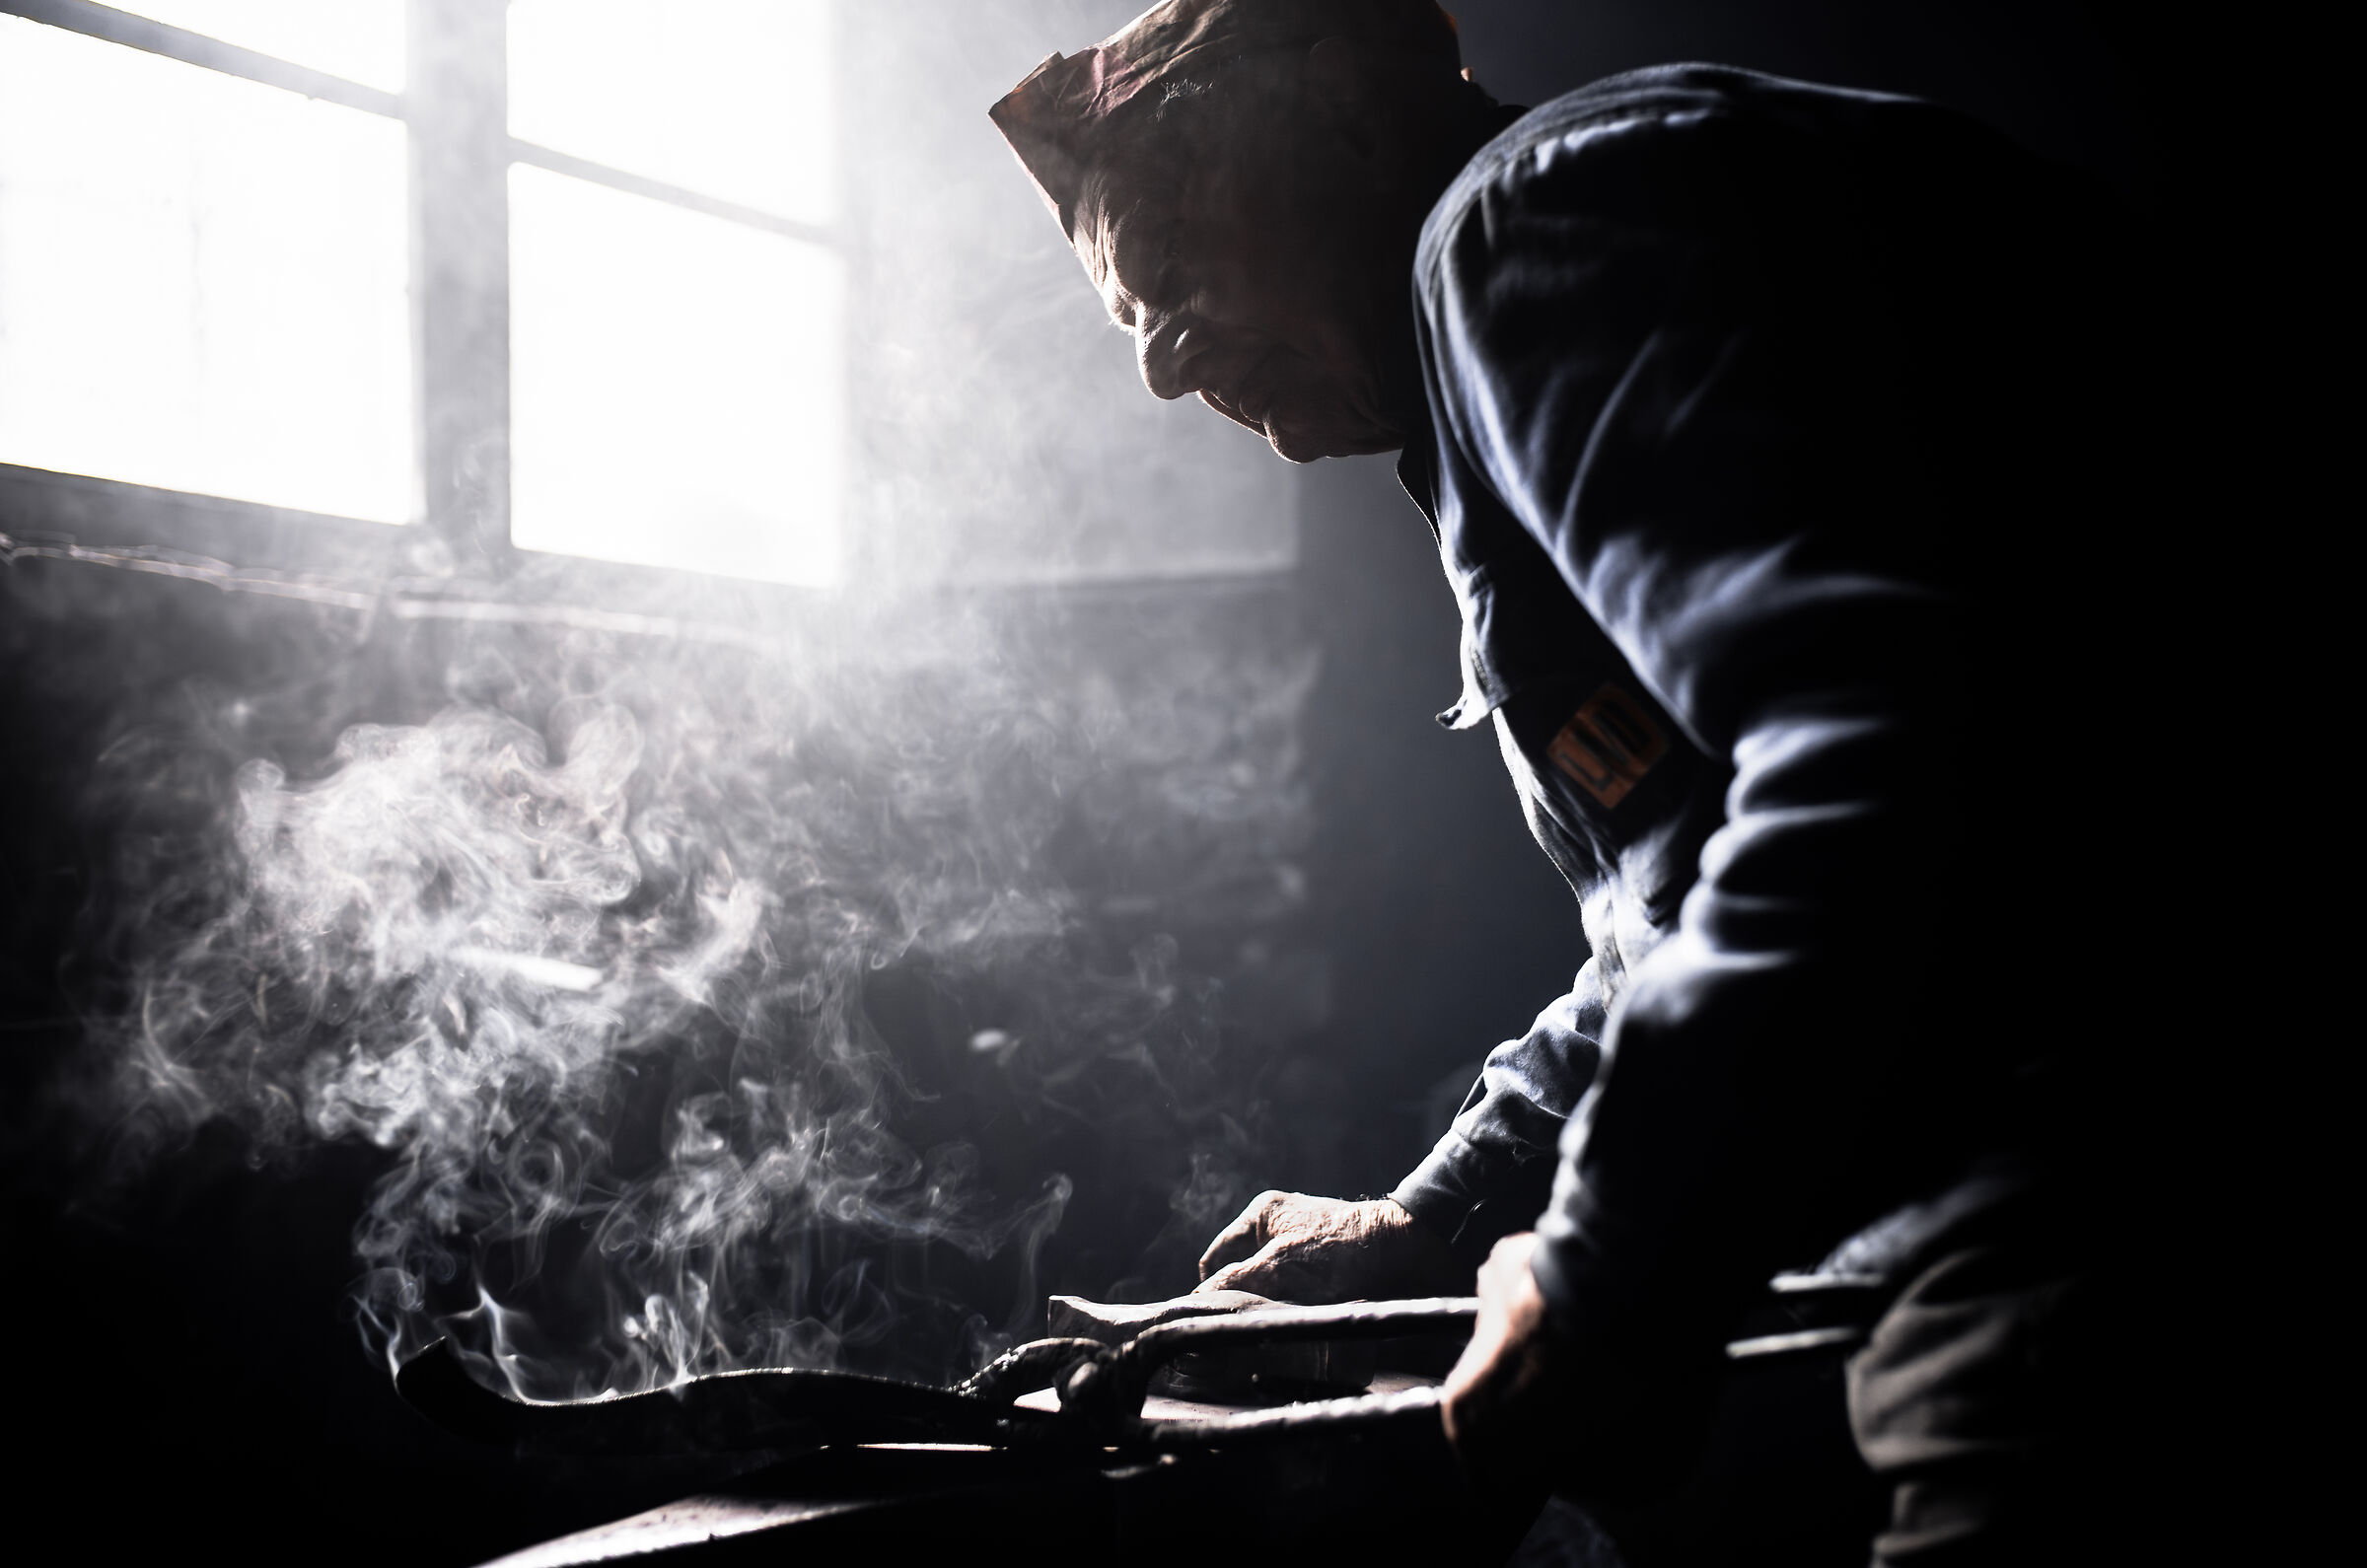 " The Old Blacksmith and the Refuge of Past Time "...